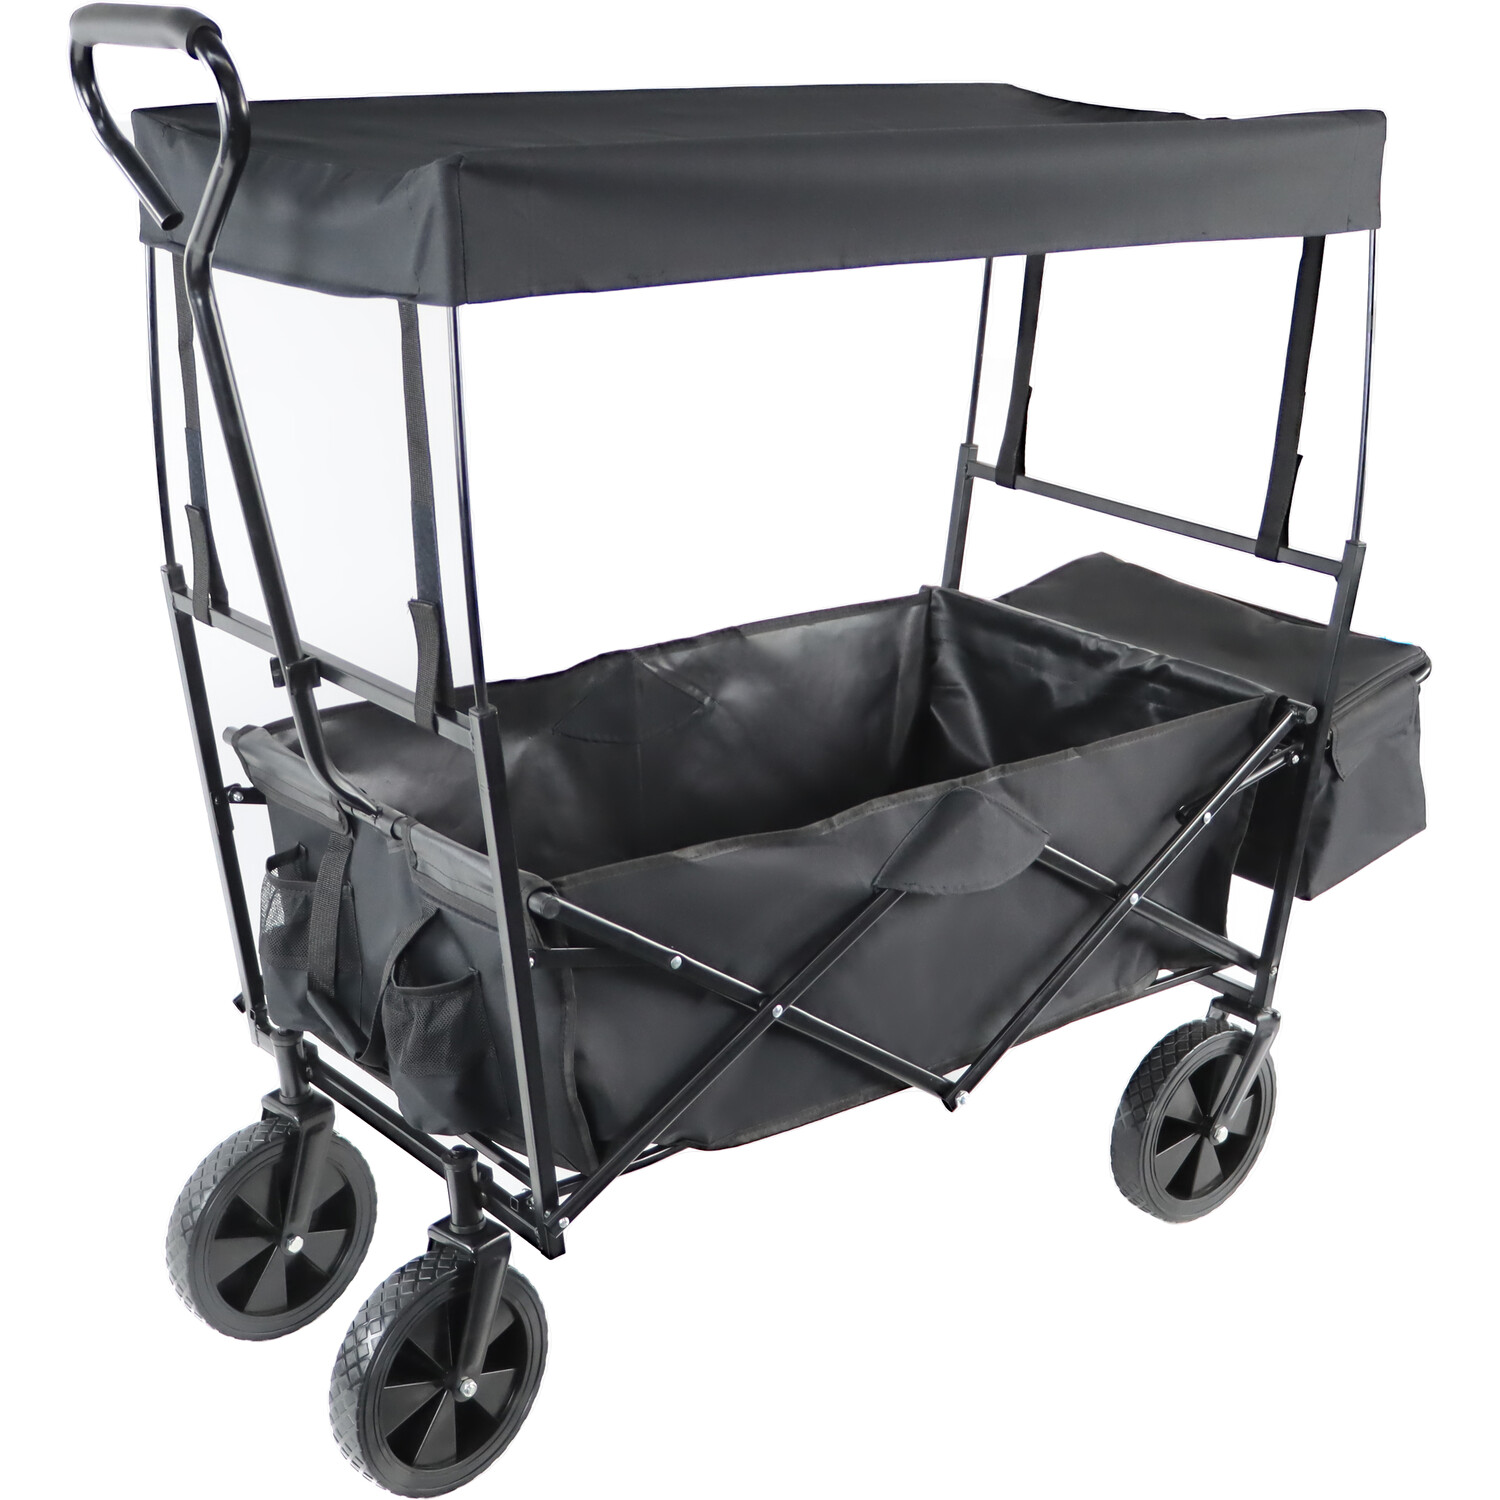 Foldable Trolley with Canopy - Black Image 1